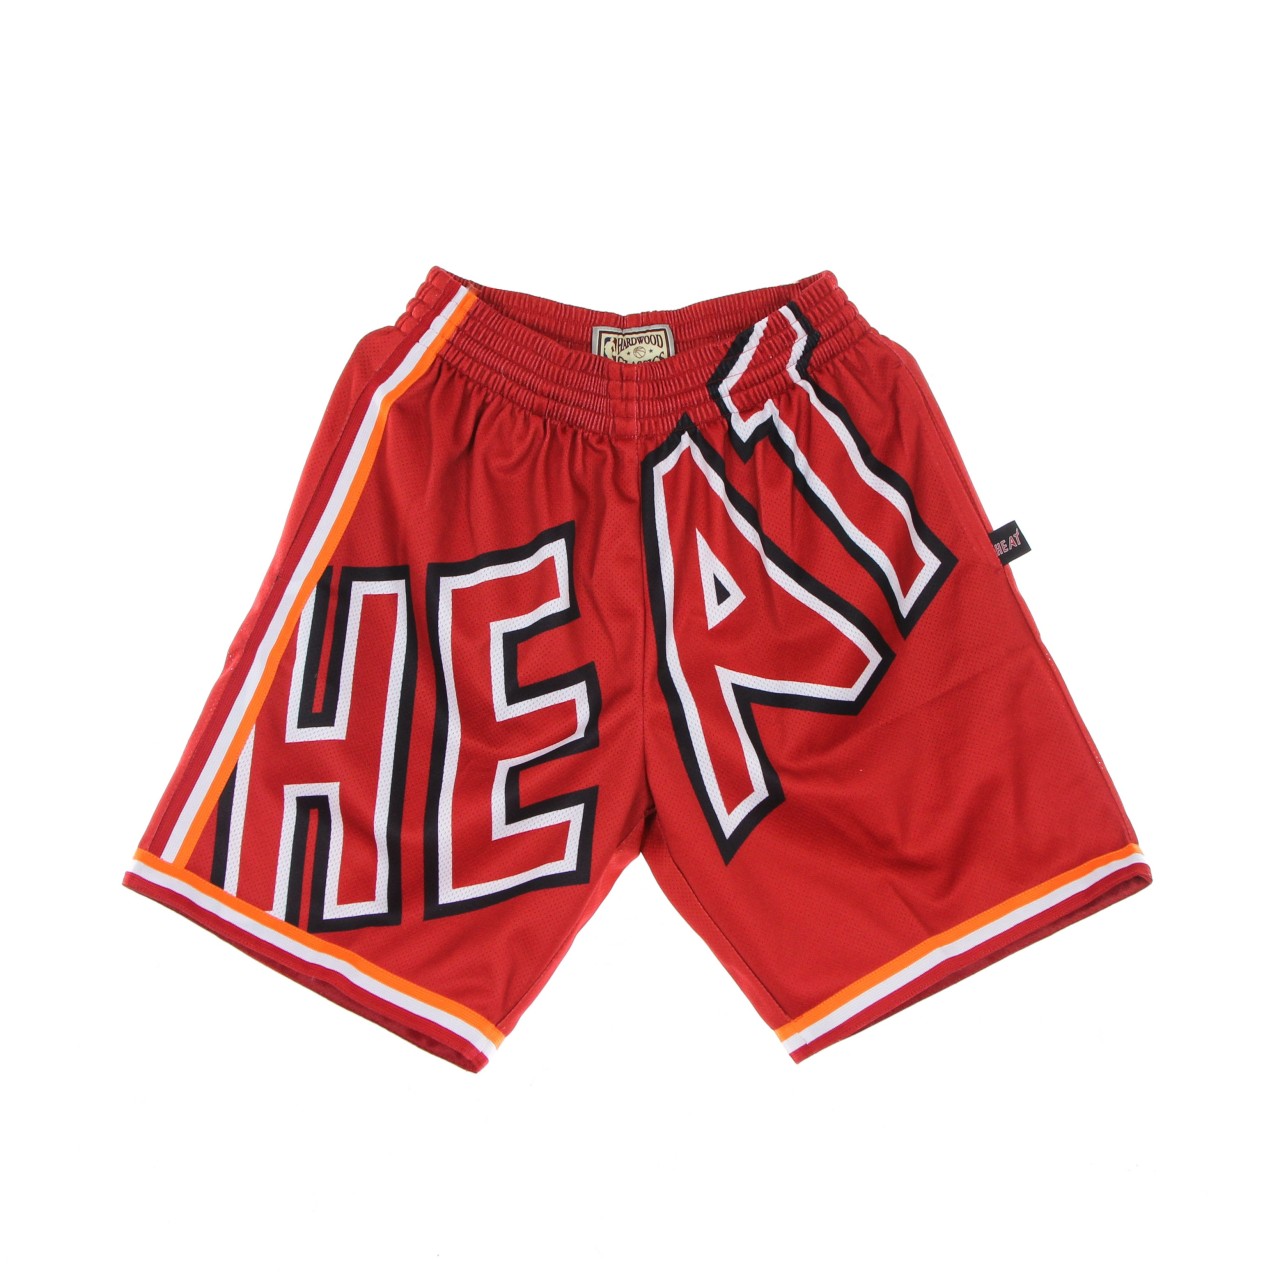 MITCHELL & NESS NBA BIG FACE BLOWN OUT FASHION SHORT HARDWOOD CLASSICS MIAHEA SHORBW19147-MHERED1